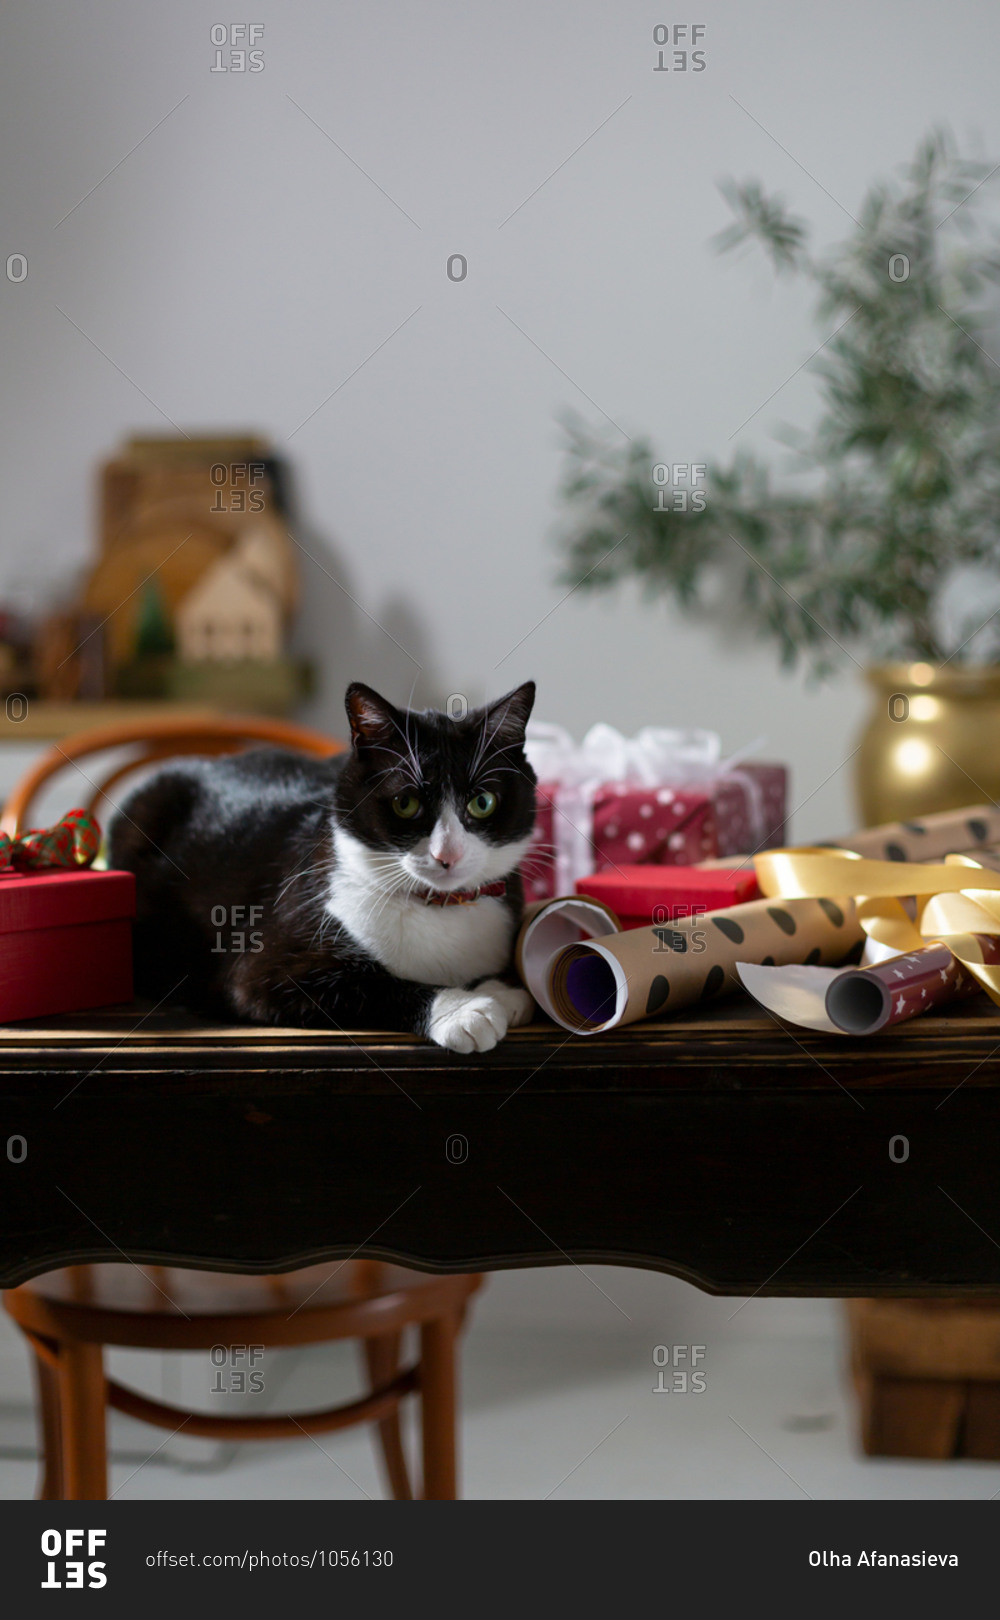 Cat and gift boxes on table